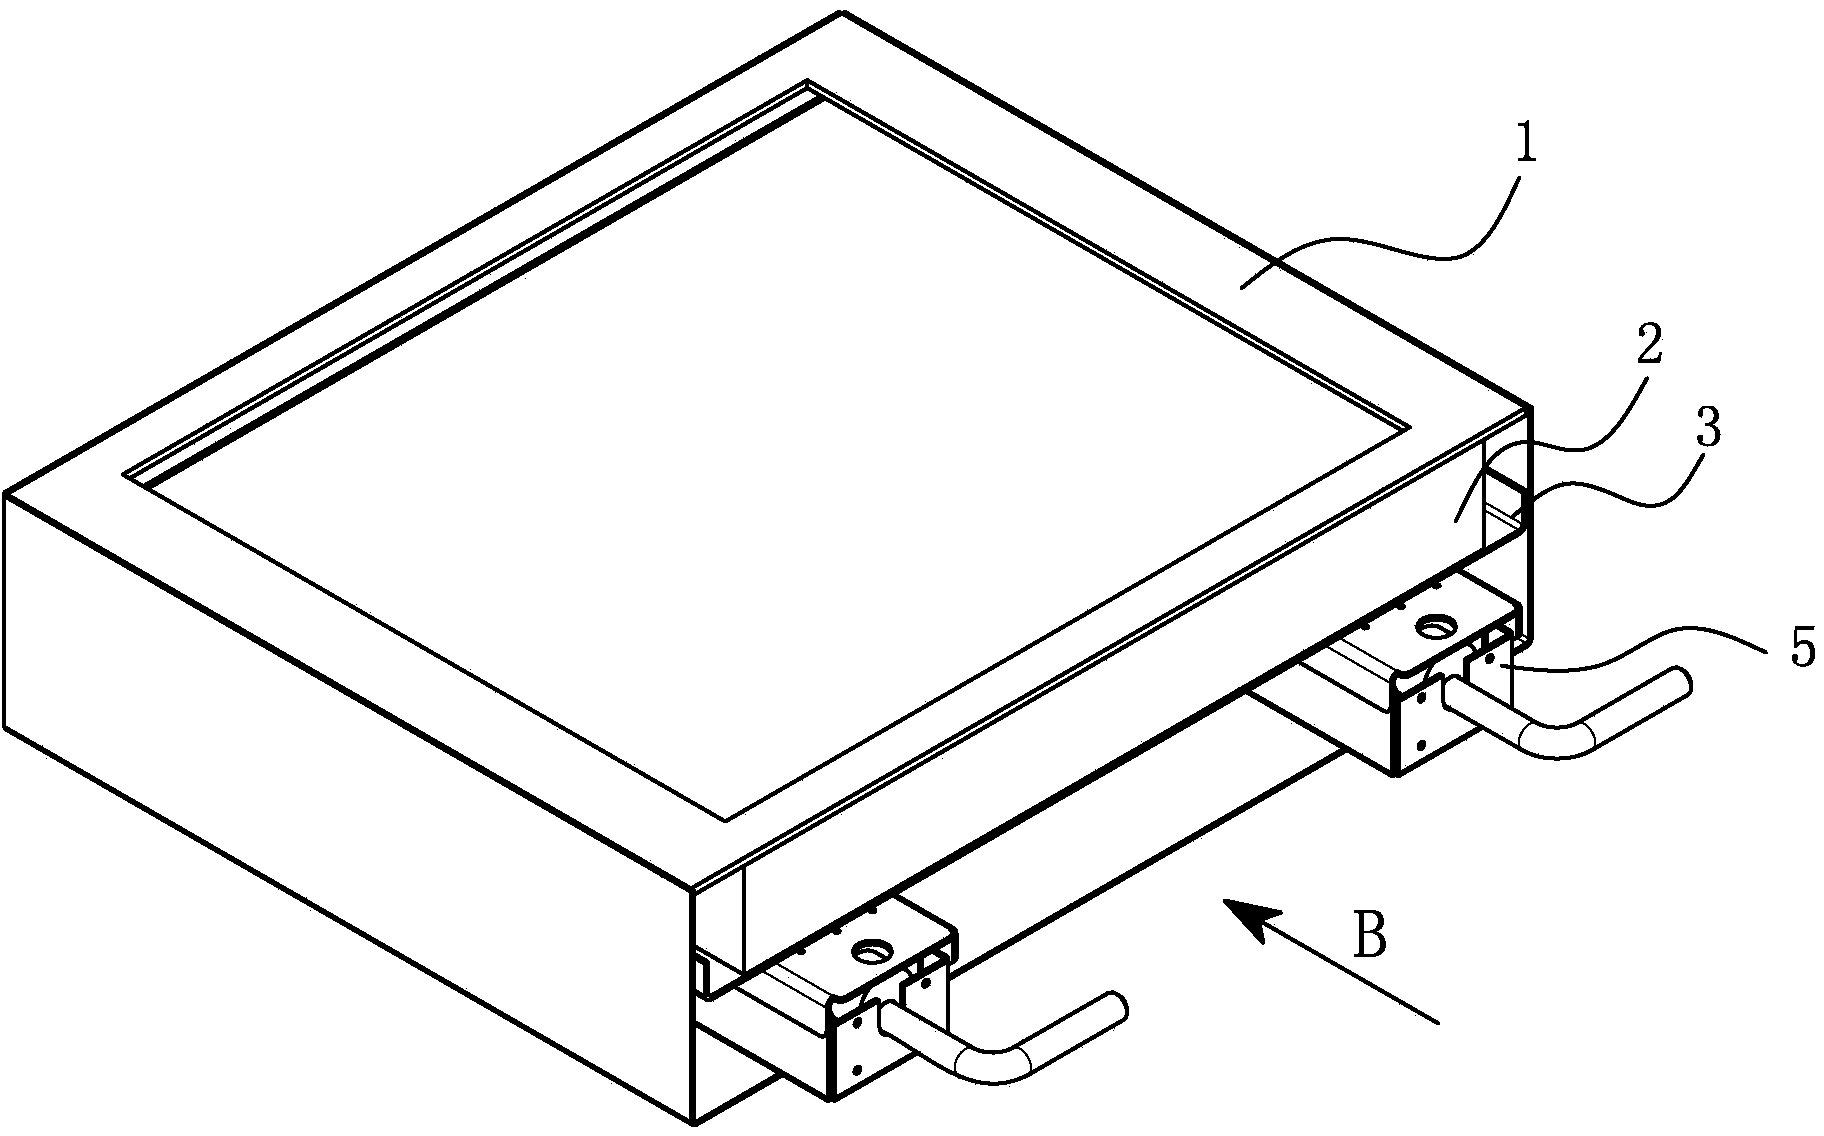 Compressing mechanism for high-efficiency air filter